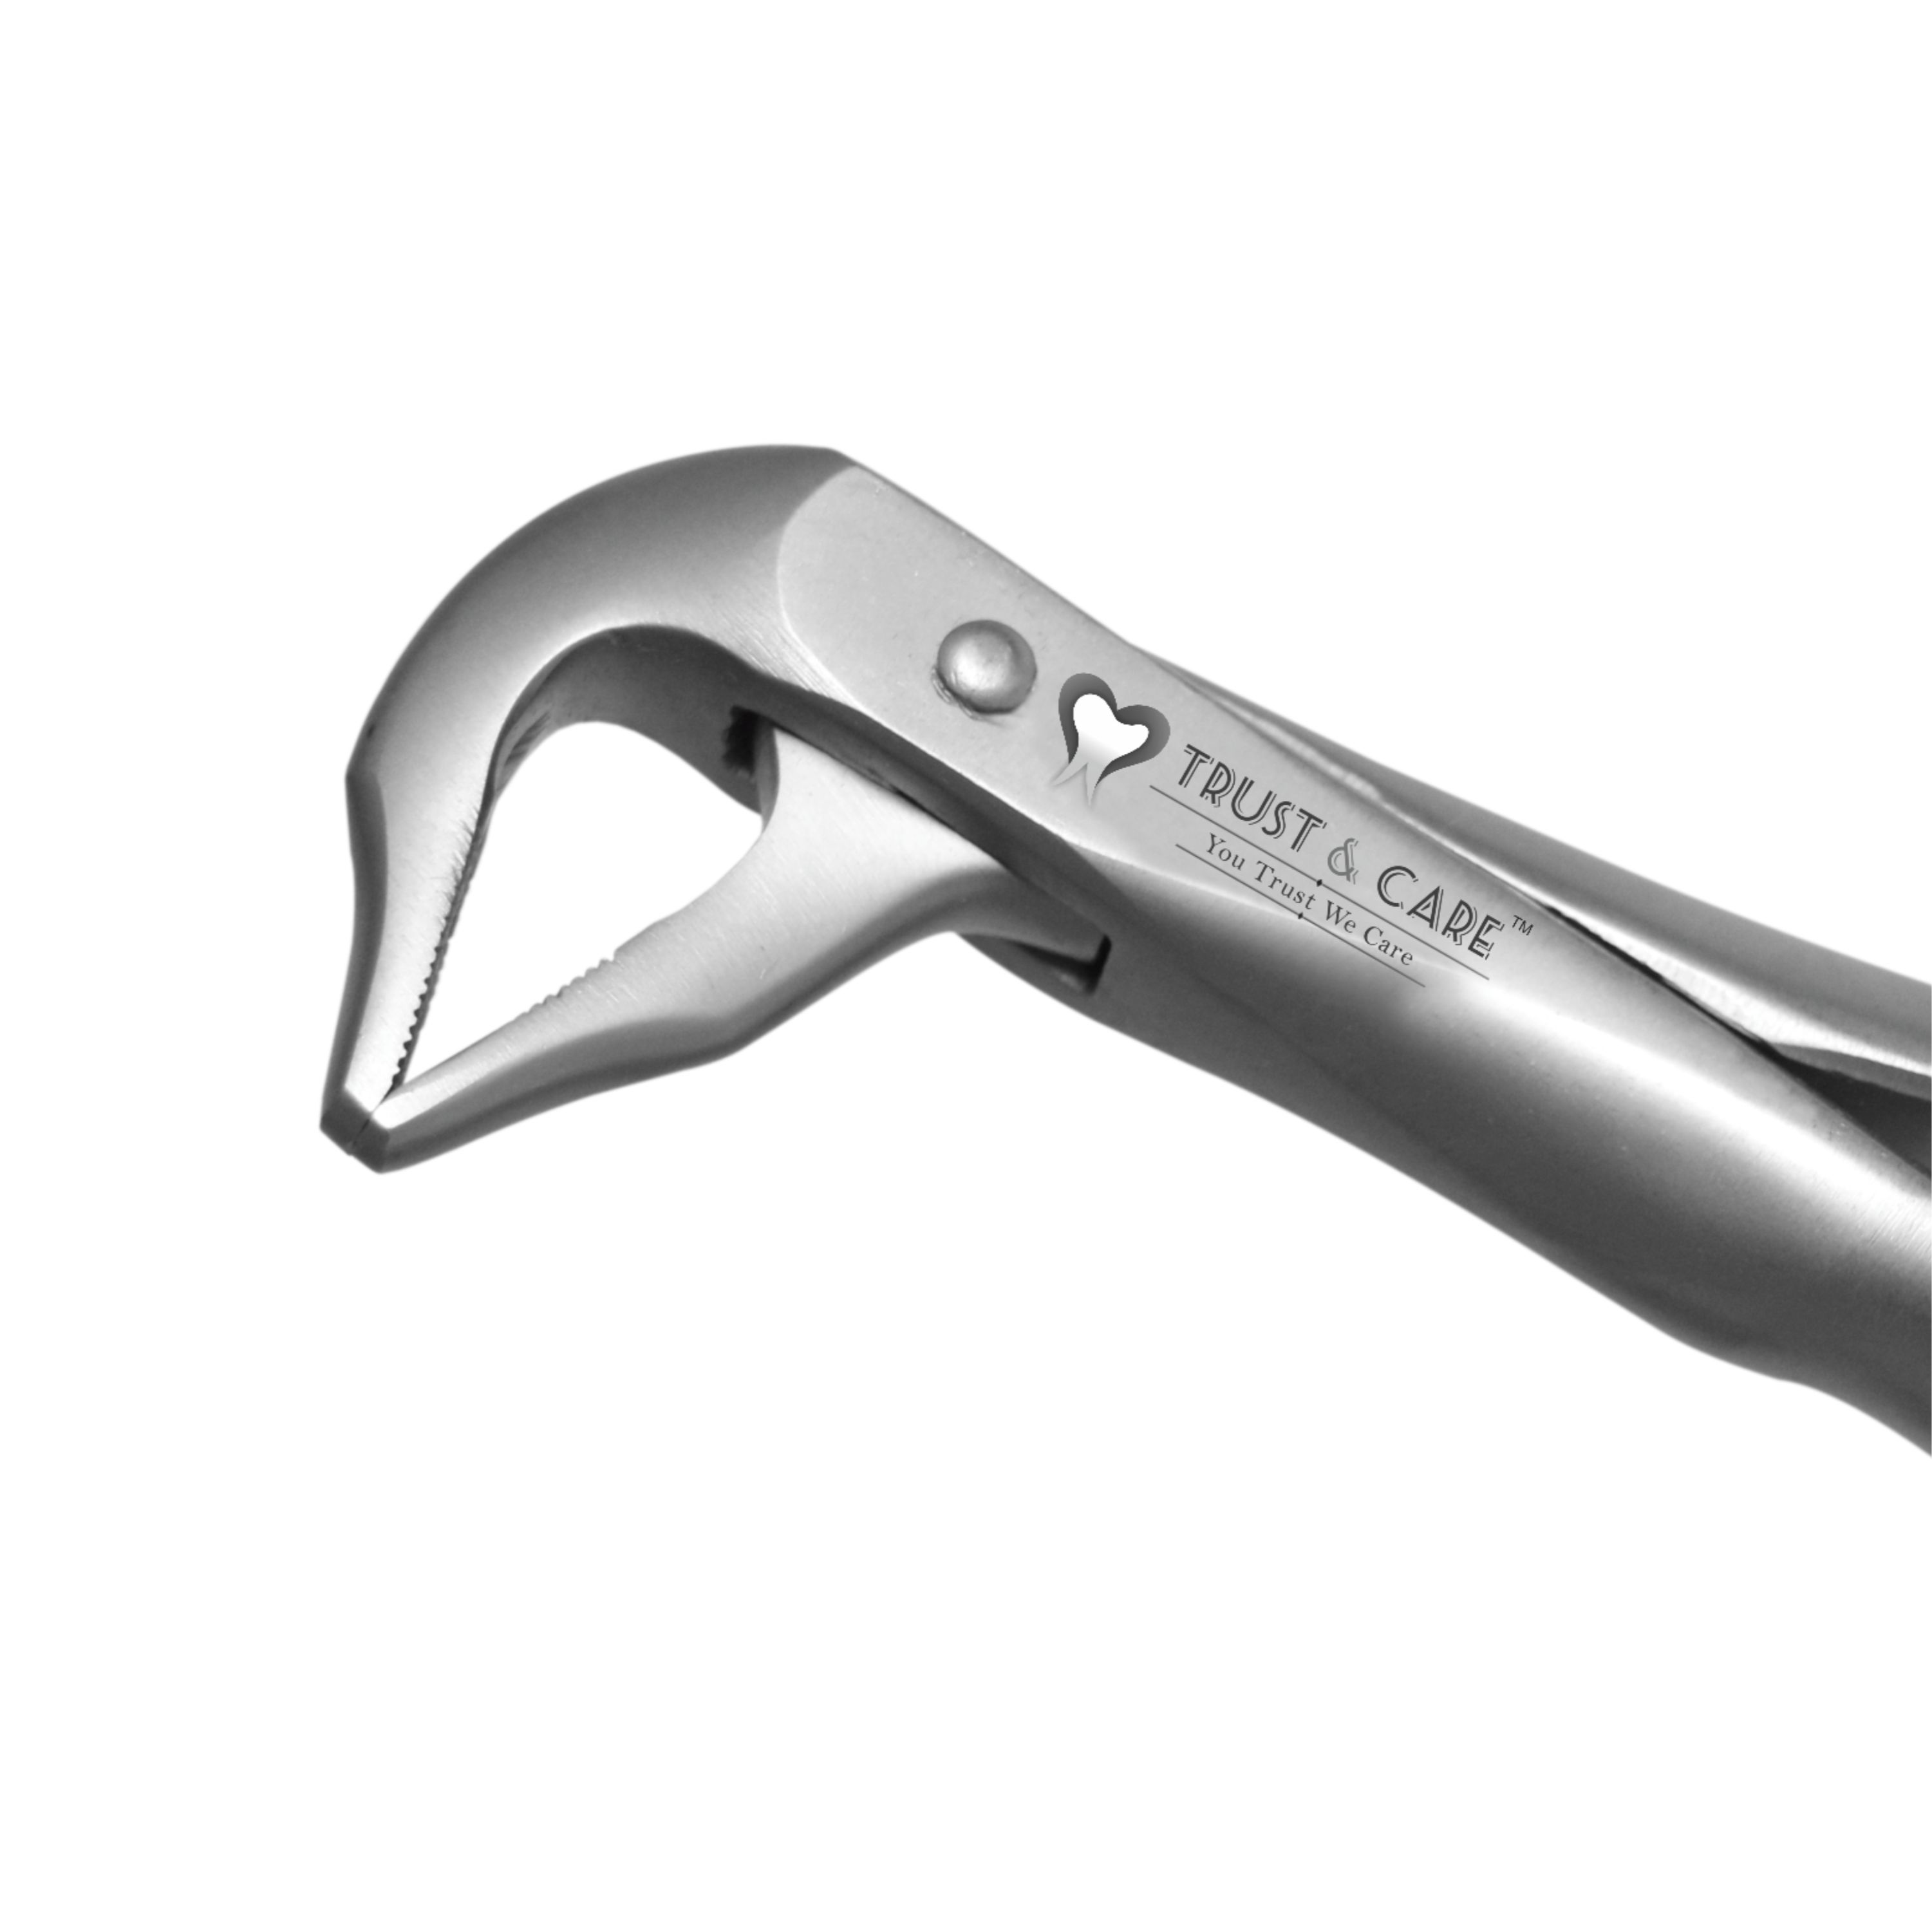 Trust & Care Secure Forcep Lower Roots Fig No. 959.01